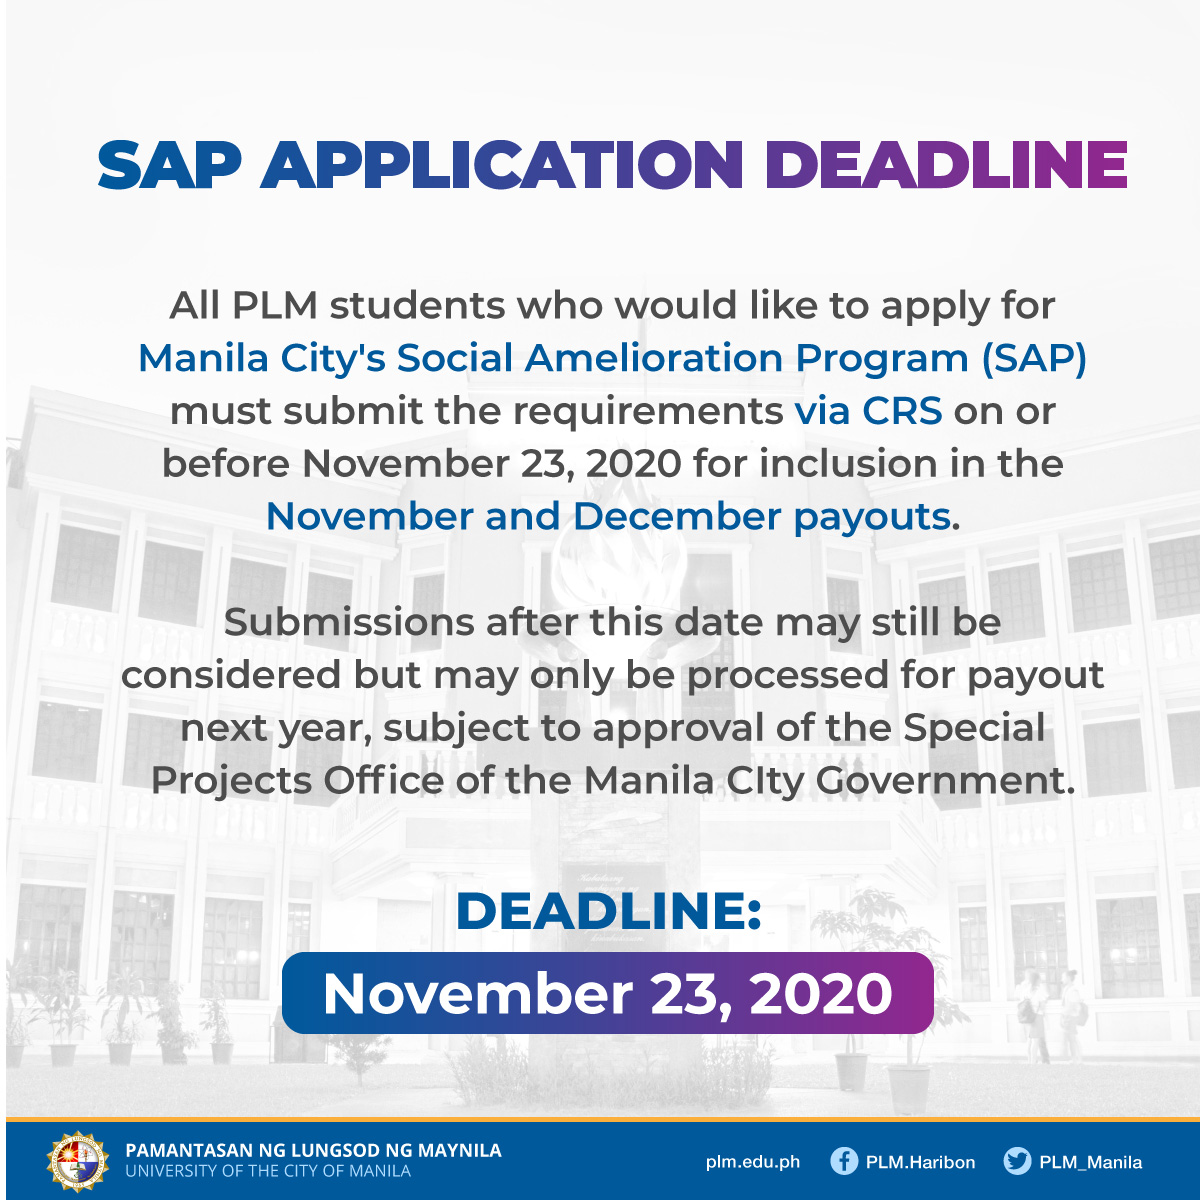 Advisory on the submission deadline for SAP requirements